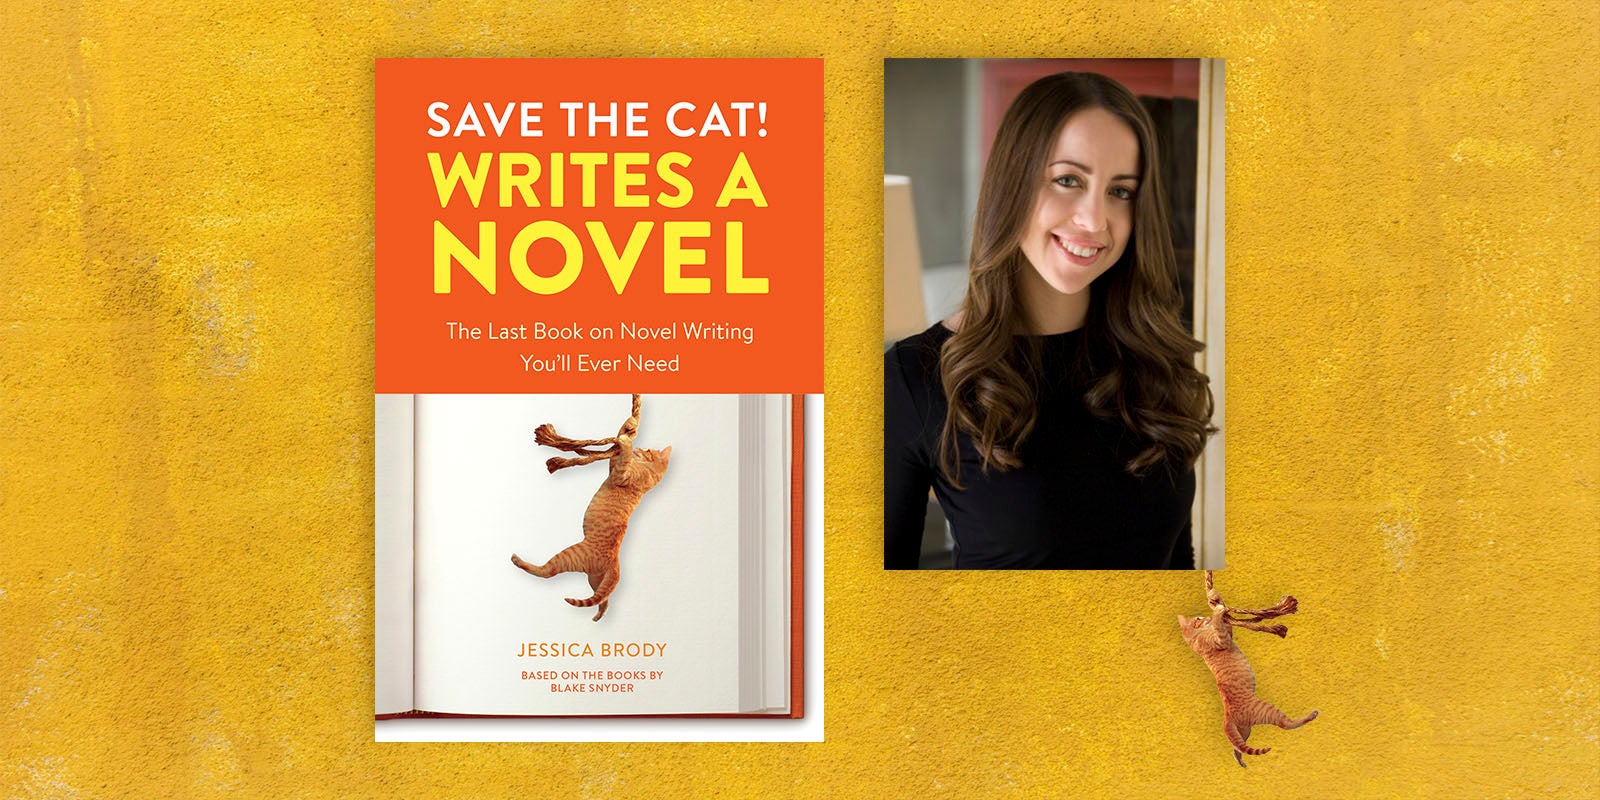 Jessica Brody on Her Innovative New Guide for Creative Writers